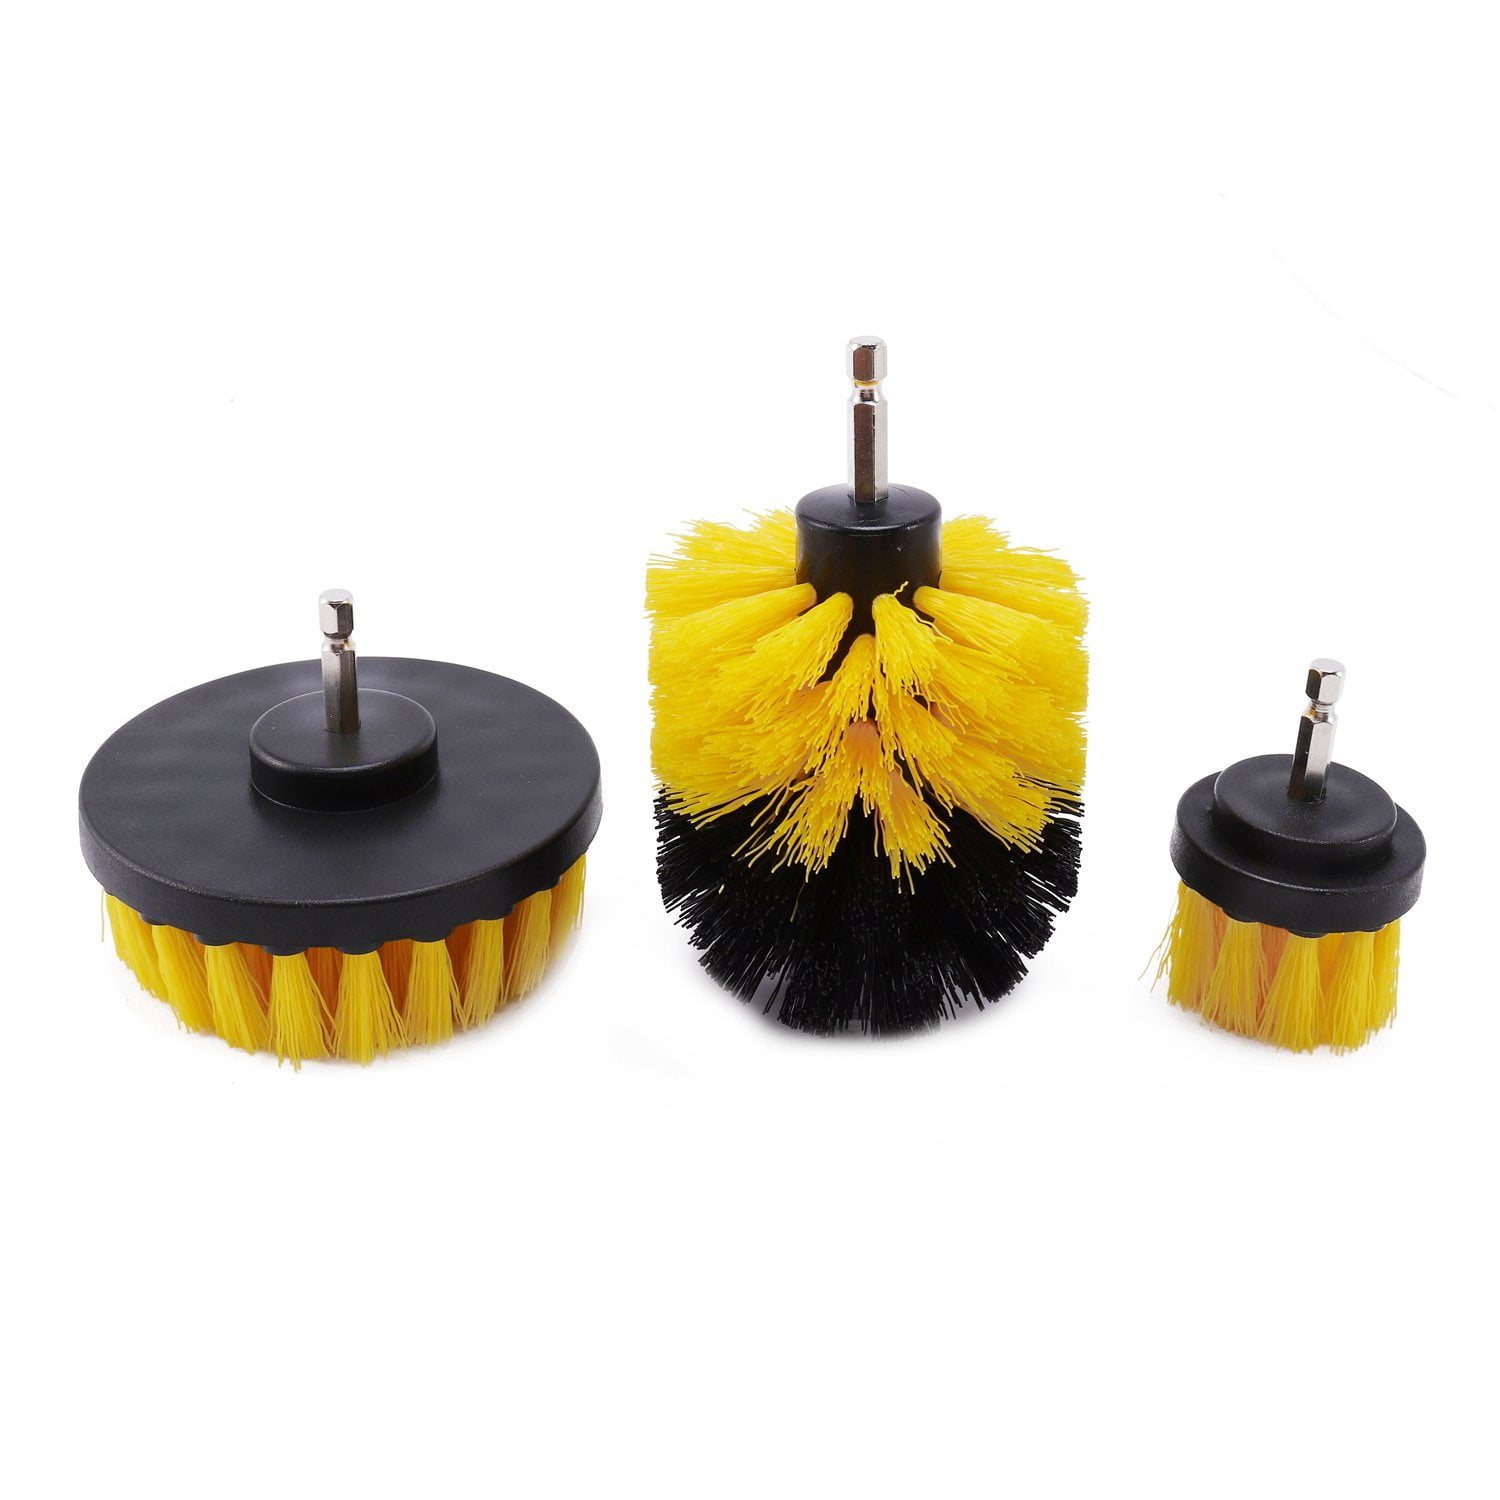 Power Scrubber Drill Brush Set Cleaner Spin Tub Shower Tile Grout Wall 3 Brushes 